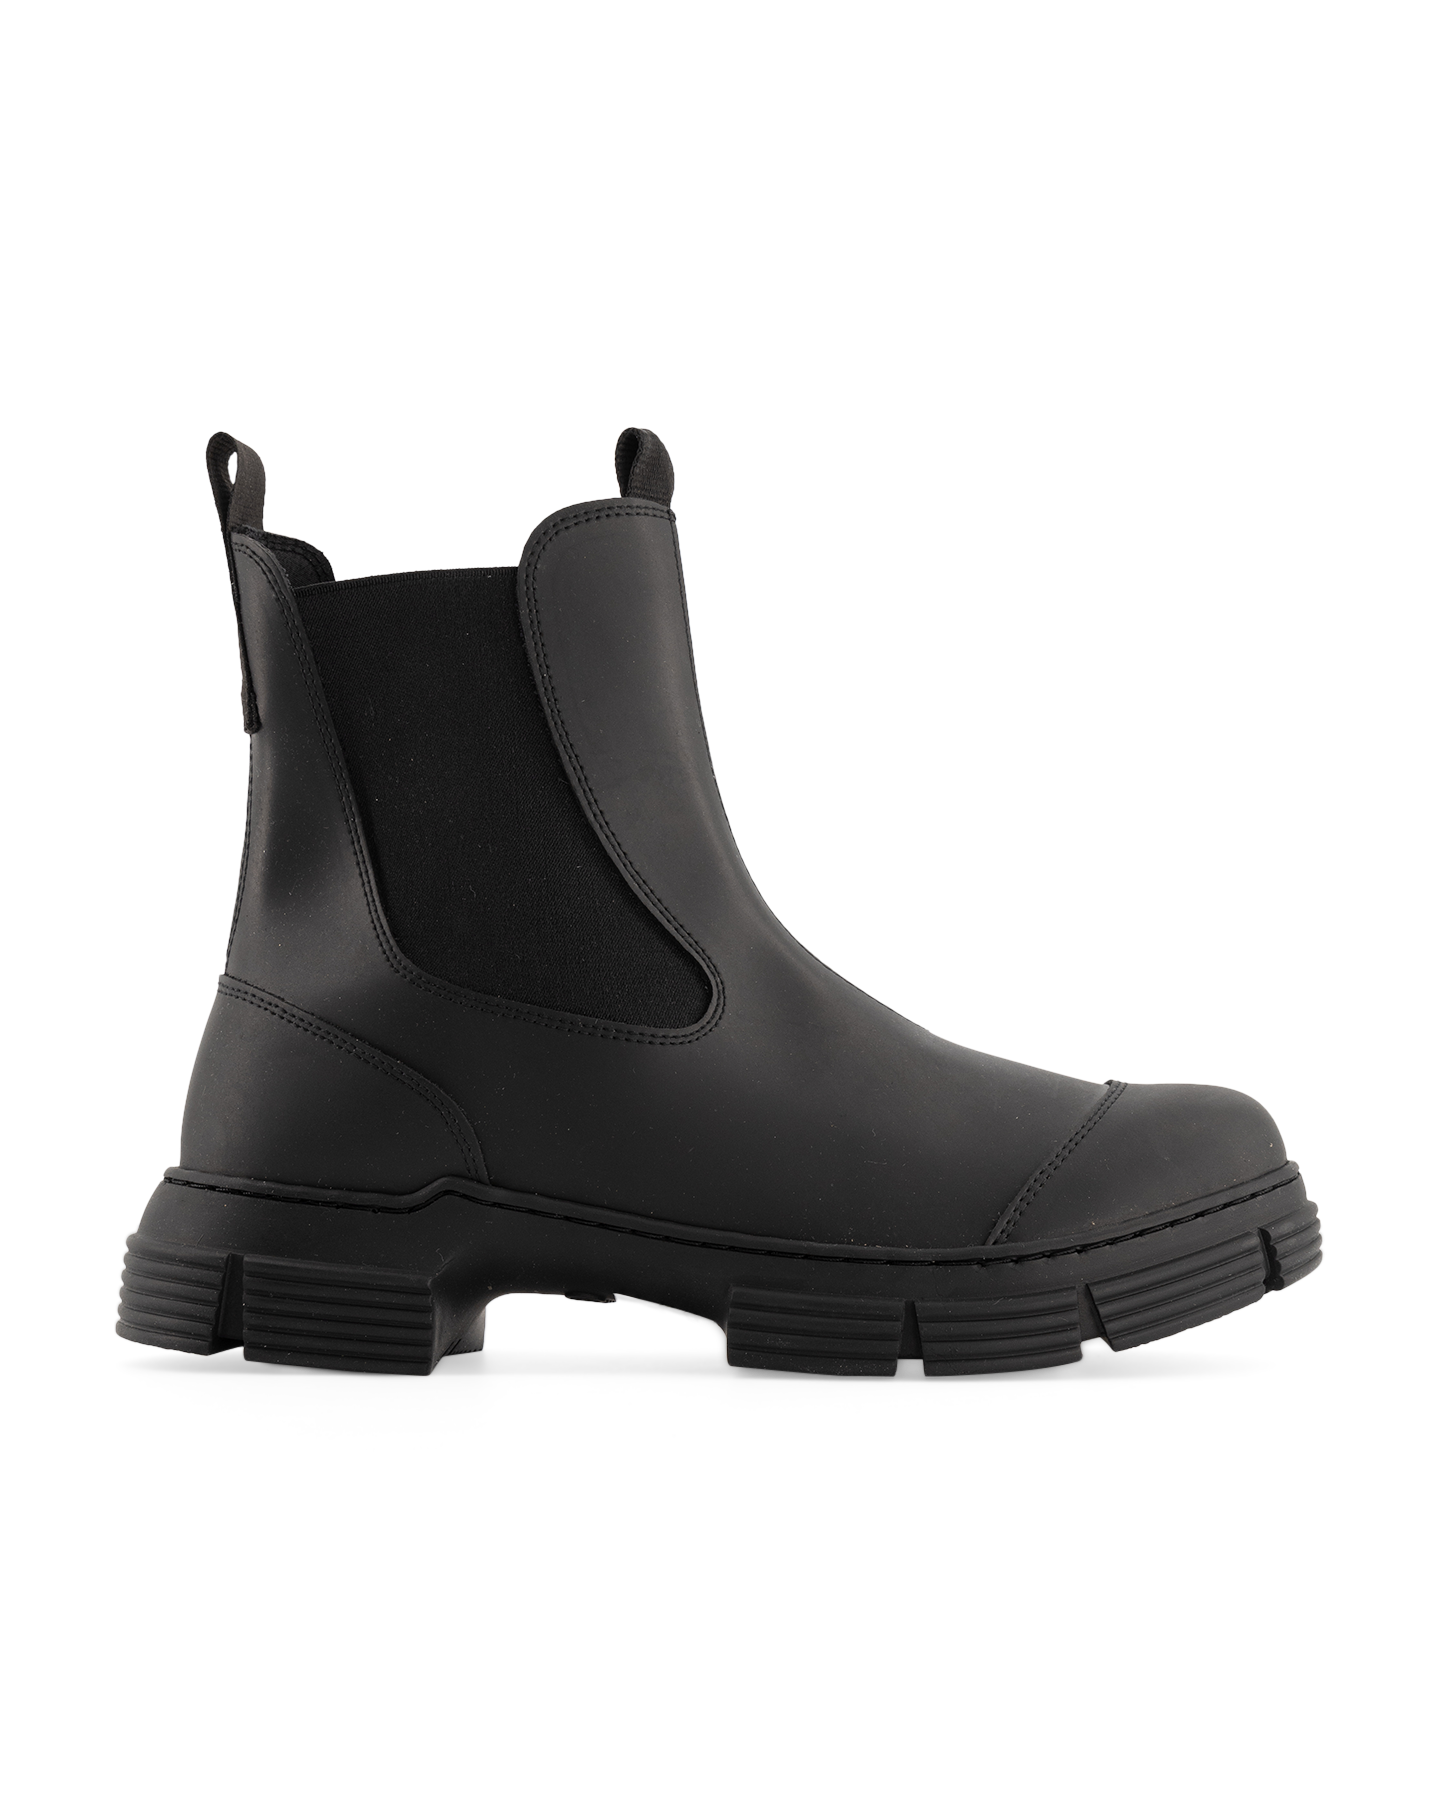 Ganni Recycled Rubber City Boot BLACK 1